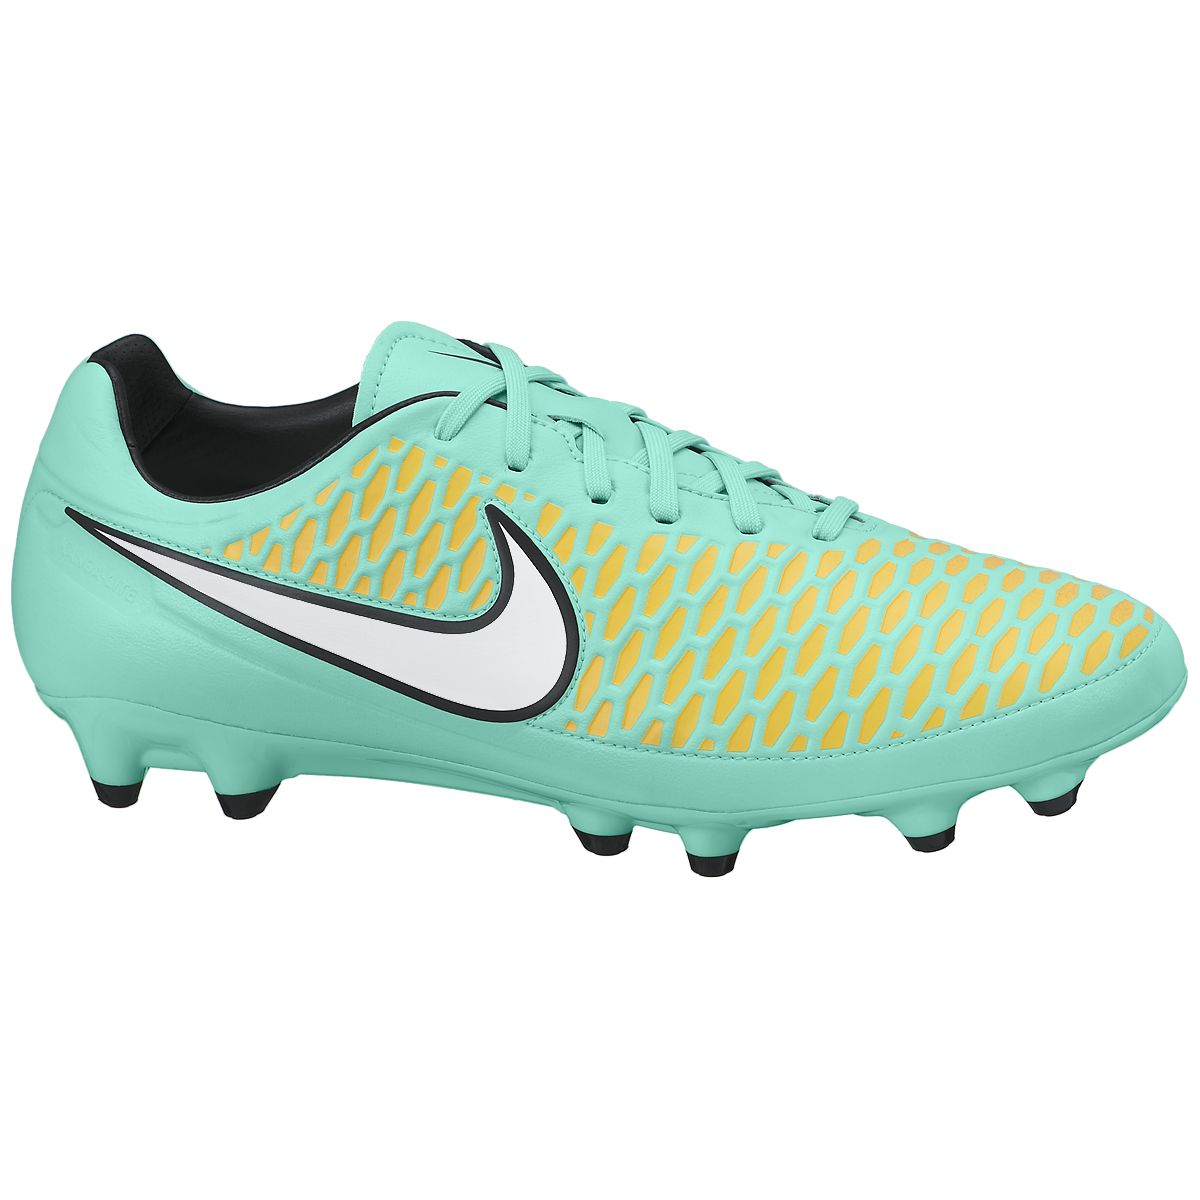 MAGISTA ORDEN FG - Men's football boots with moulded studs